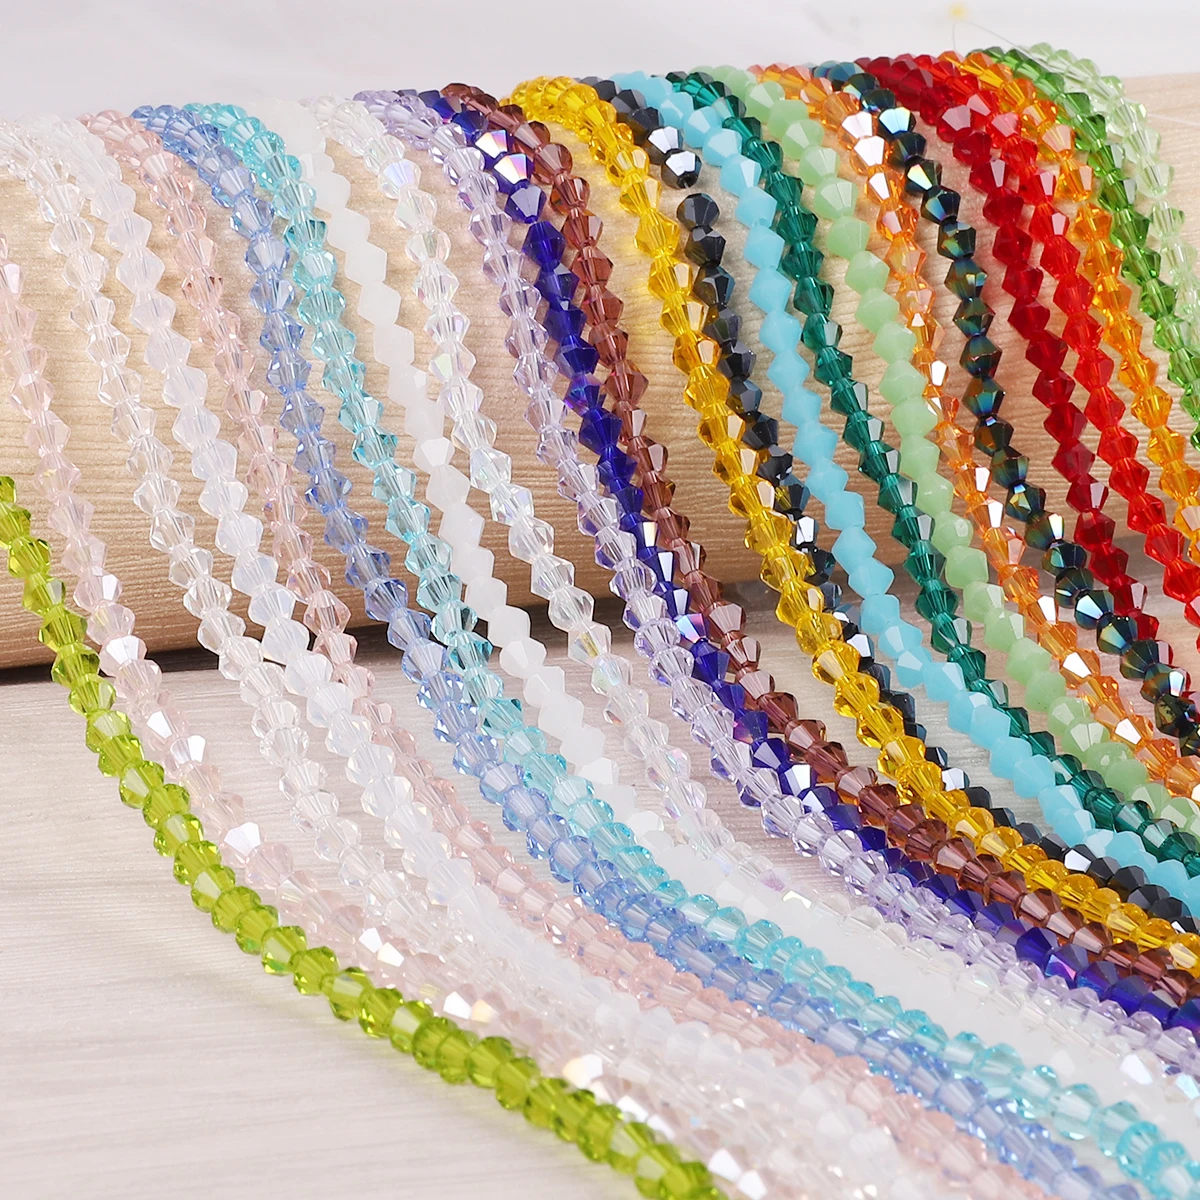 3mm 4mm 6mm 8mm Bicone Faceted Crystal Glass Loose Crafts Beads Jewelry Making 